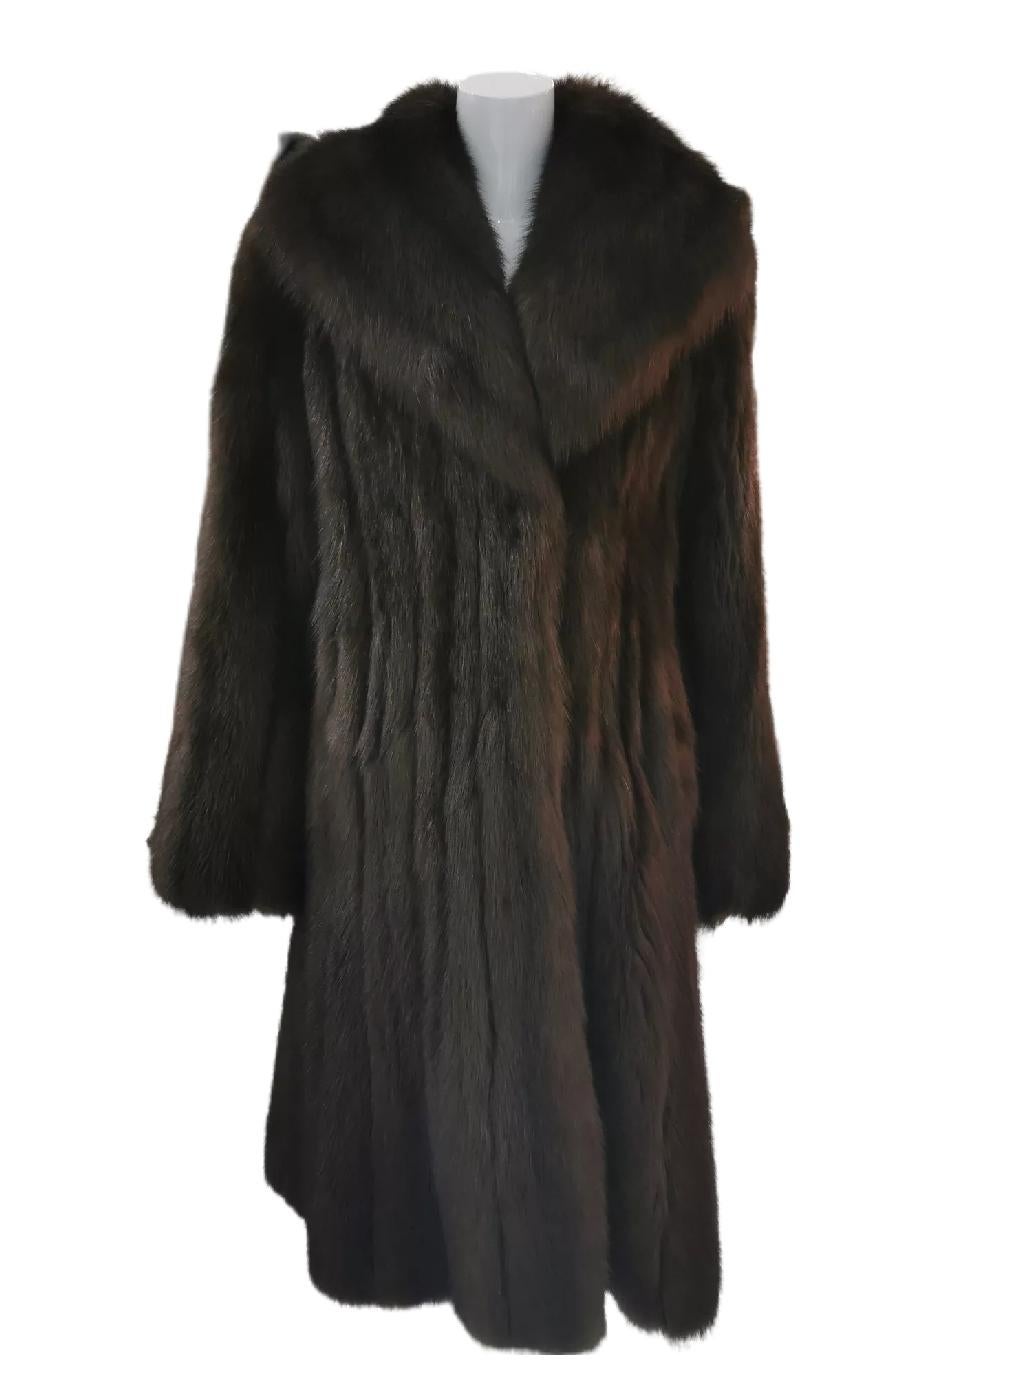 DESCRIPTION : 
The most luxurious Louis Féraud baruzin Russian Sable fur coat with a royal style portrait collar and long sleeves

Made in France

MEASUREMENTS :

SIZE: 8

LENGTH: 40